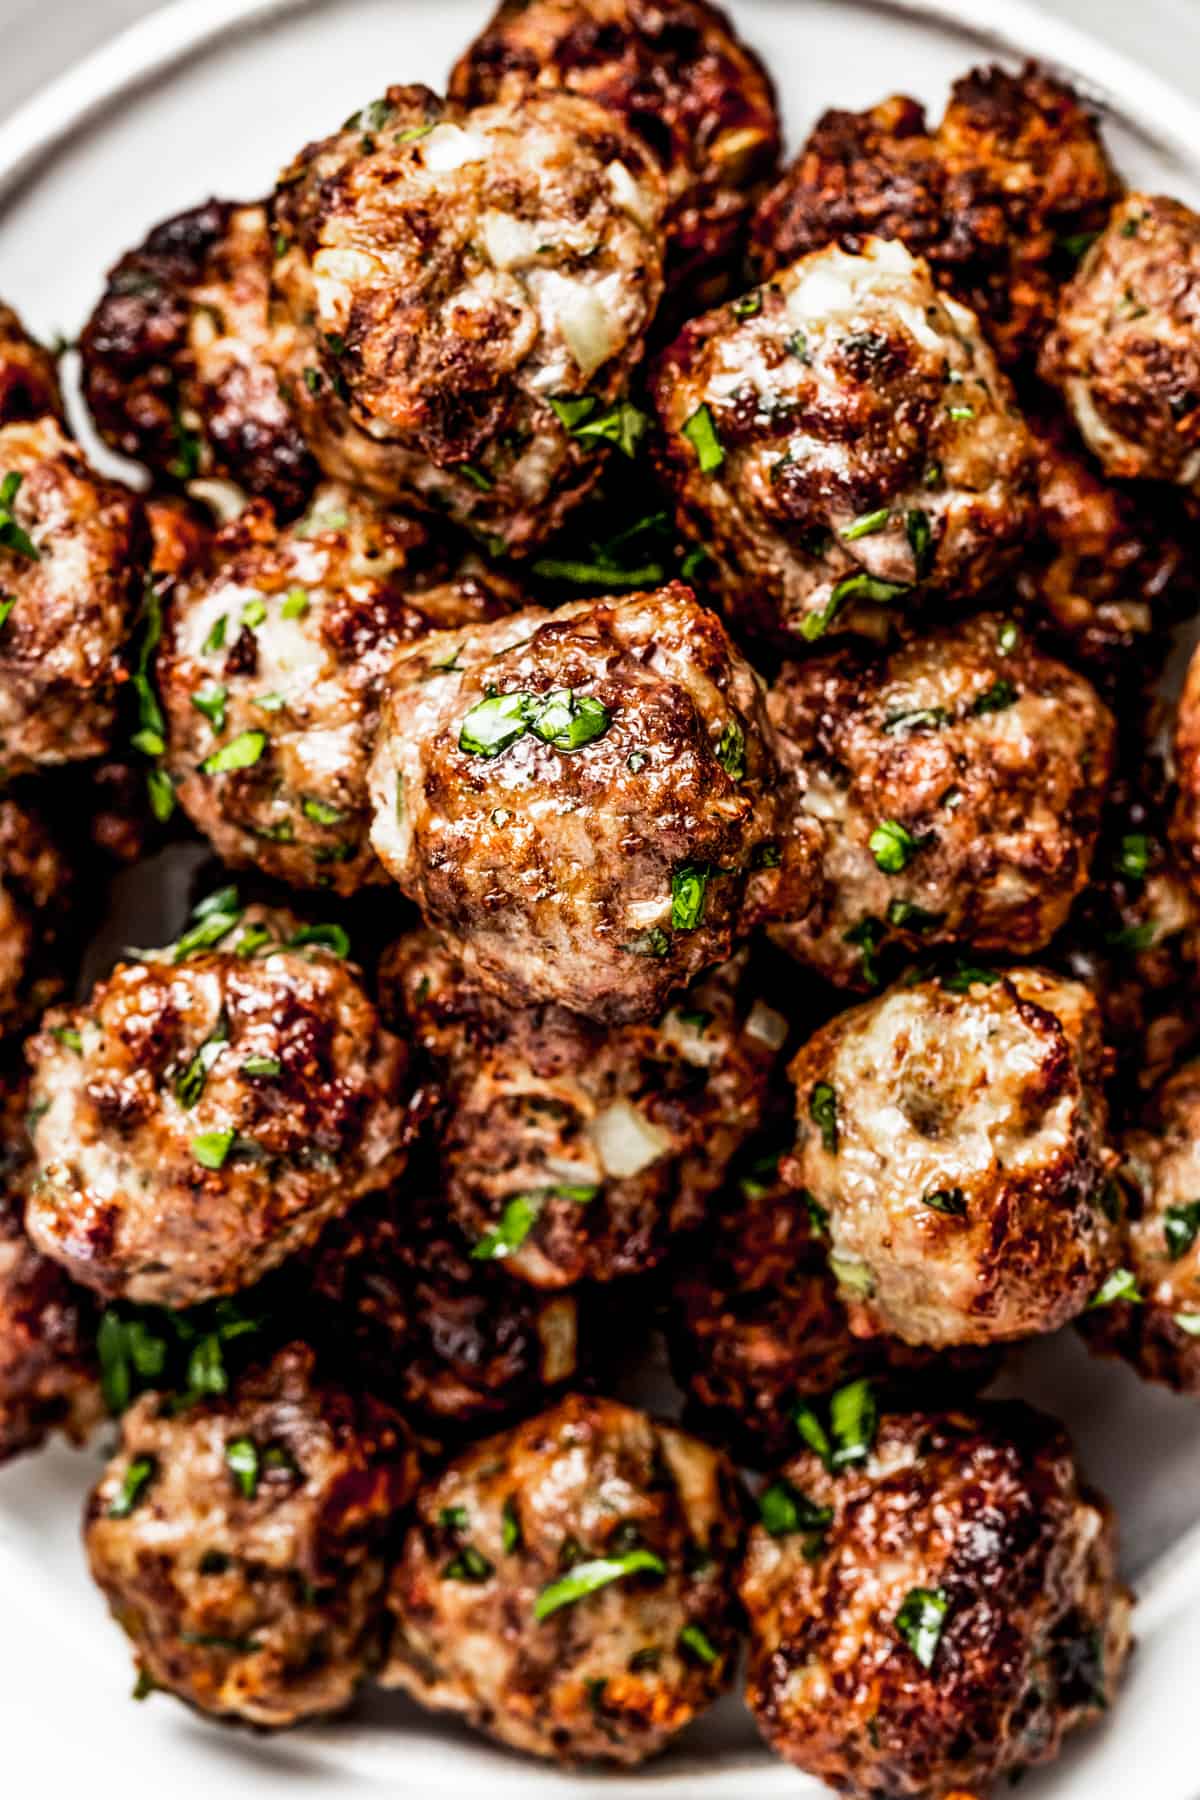 Overhead shot of a pile of air fryer meatballs served on a white serving plate.